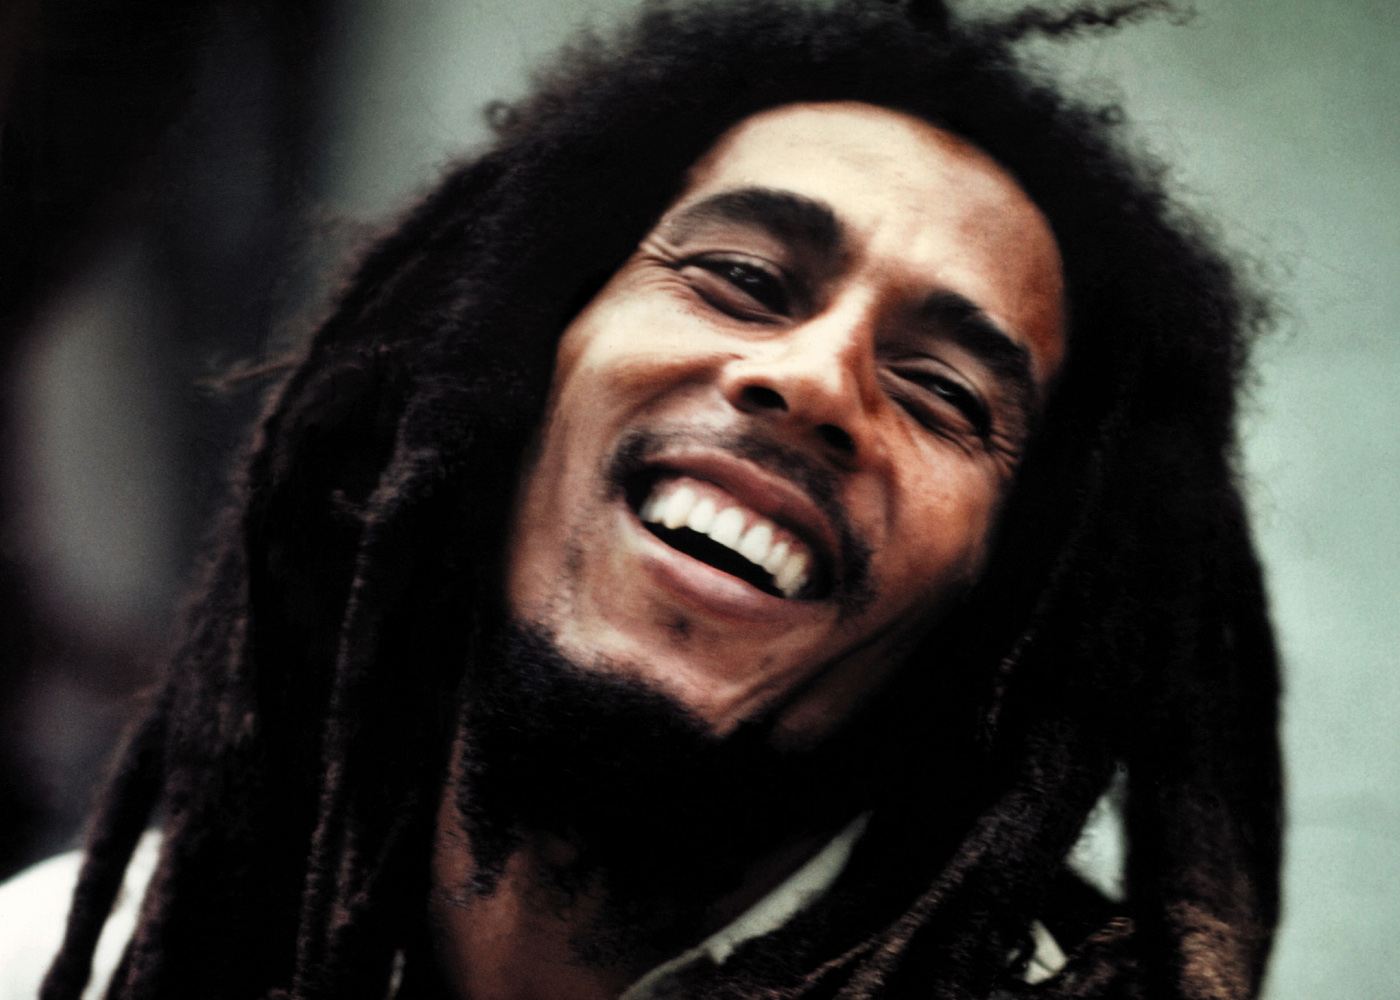 The Various Deaths of Bob Marley